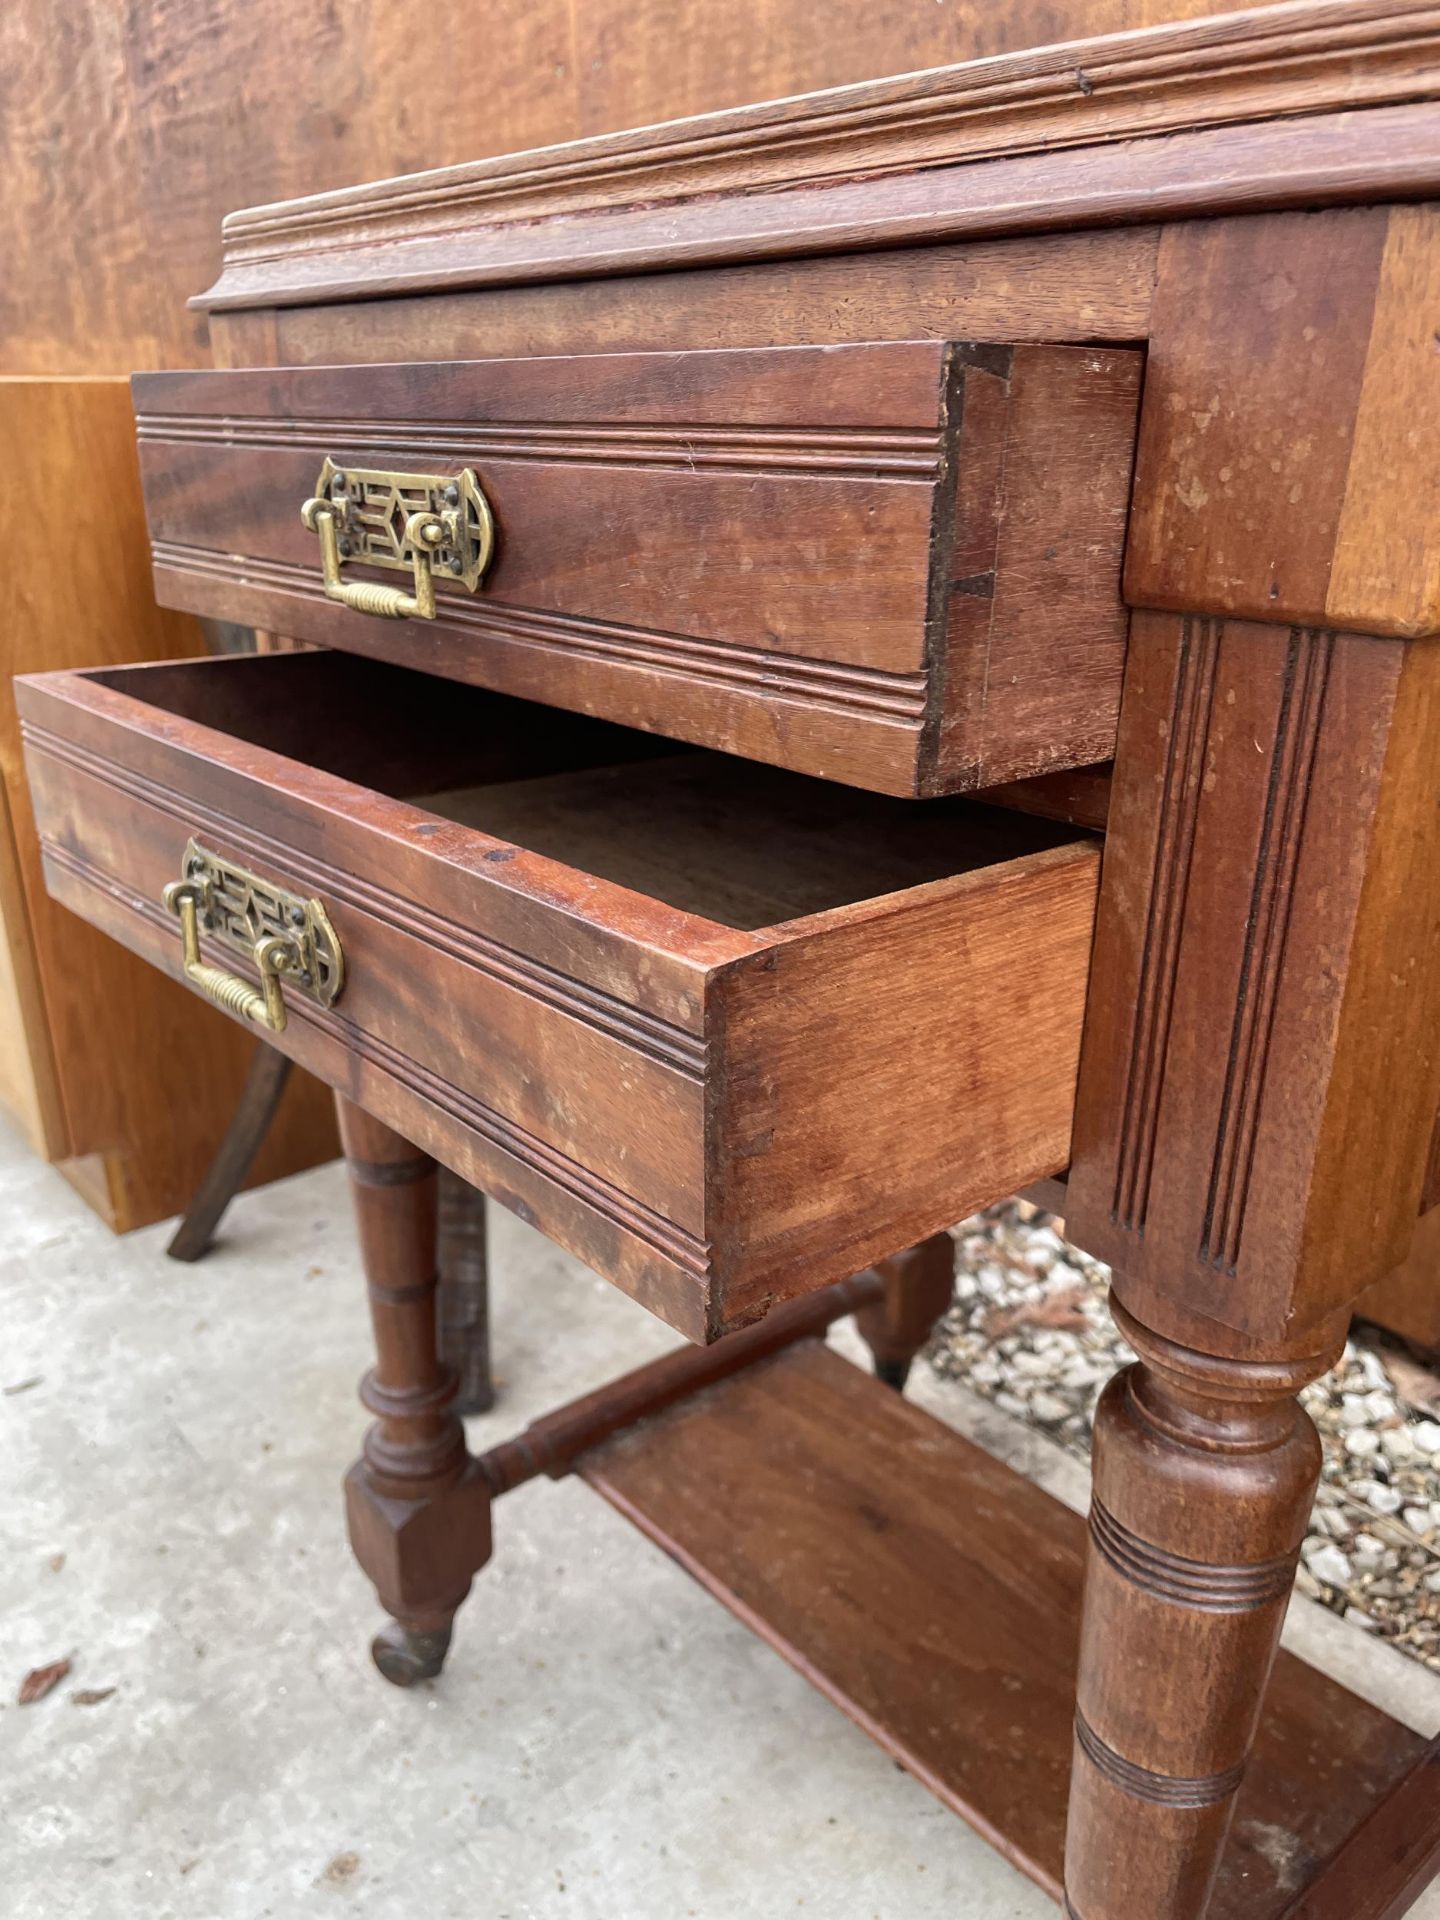 AN EDWARDIAN MAHOGANY SMALL TWO DRAWER SIDE TABLE ON TURNED LEGS, 22" WIDE - Image 3 of 3